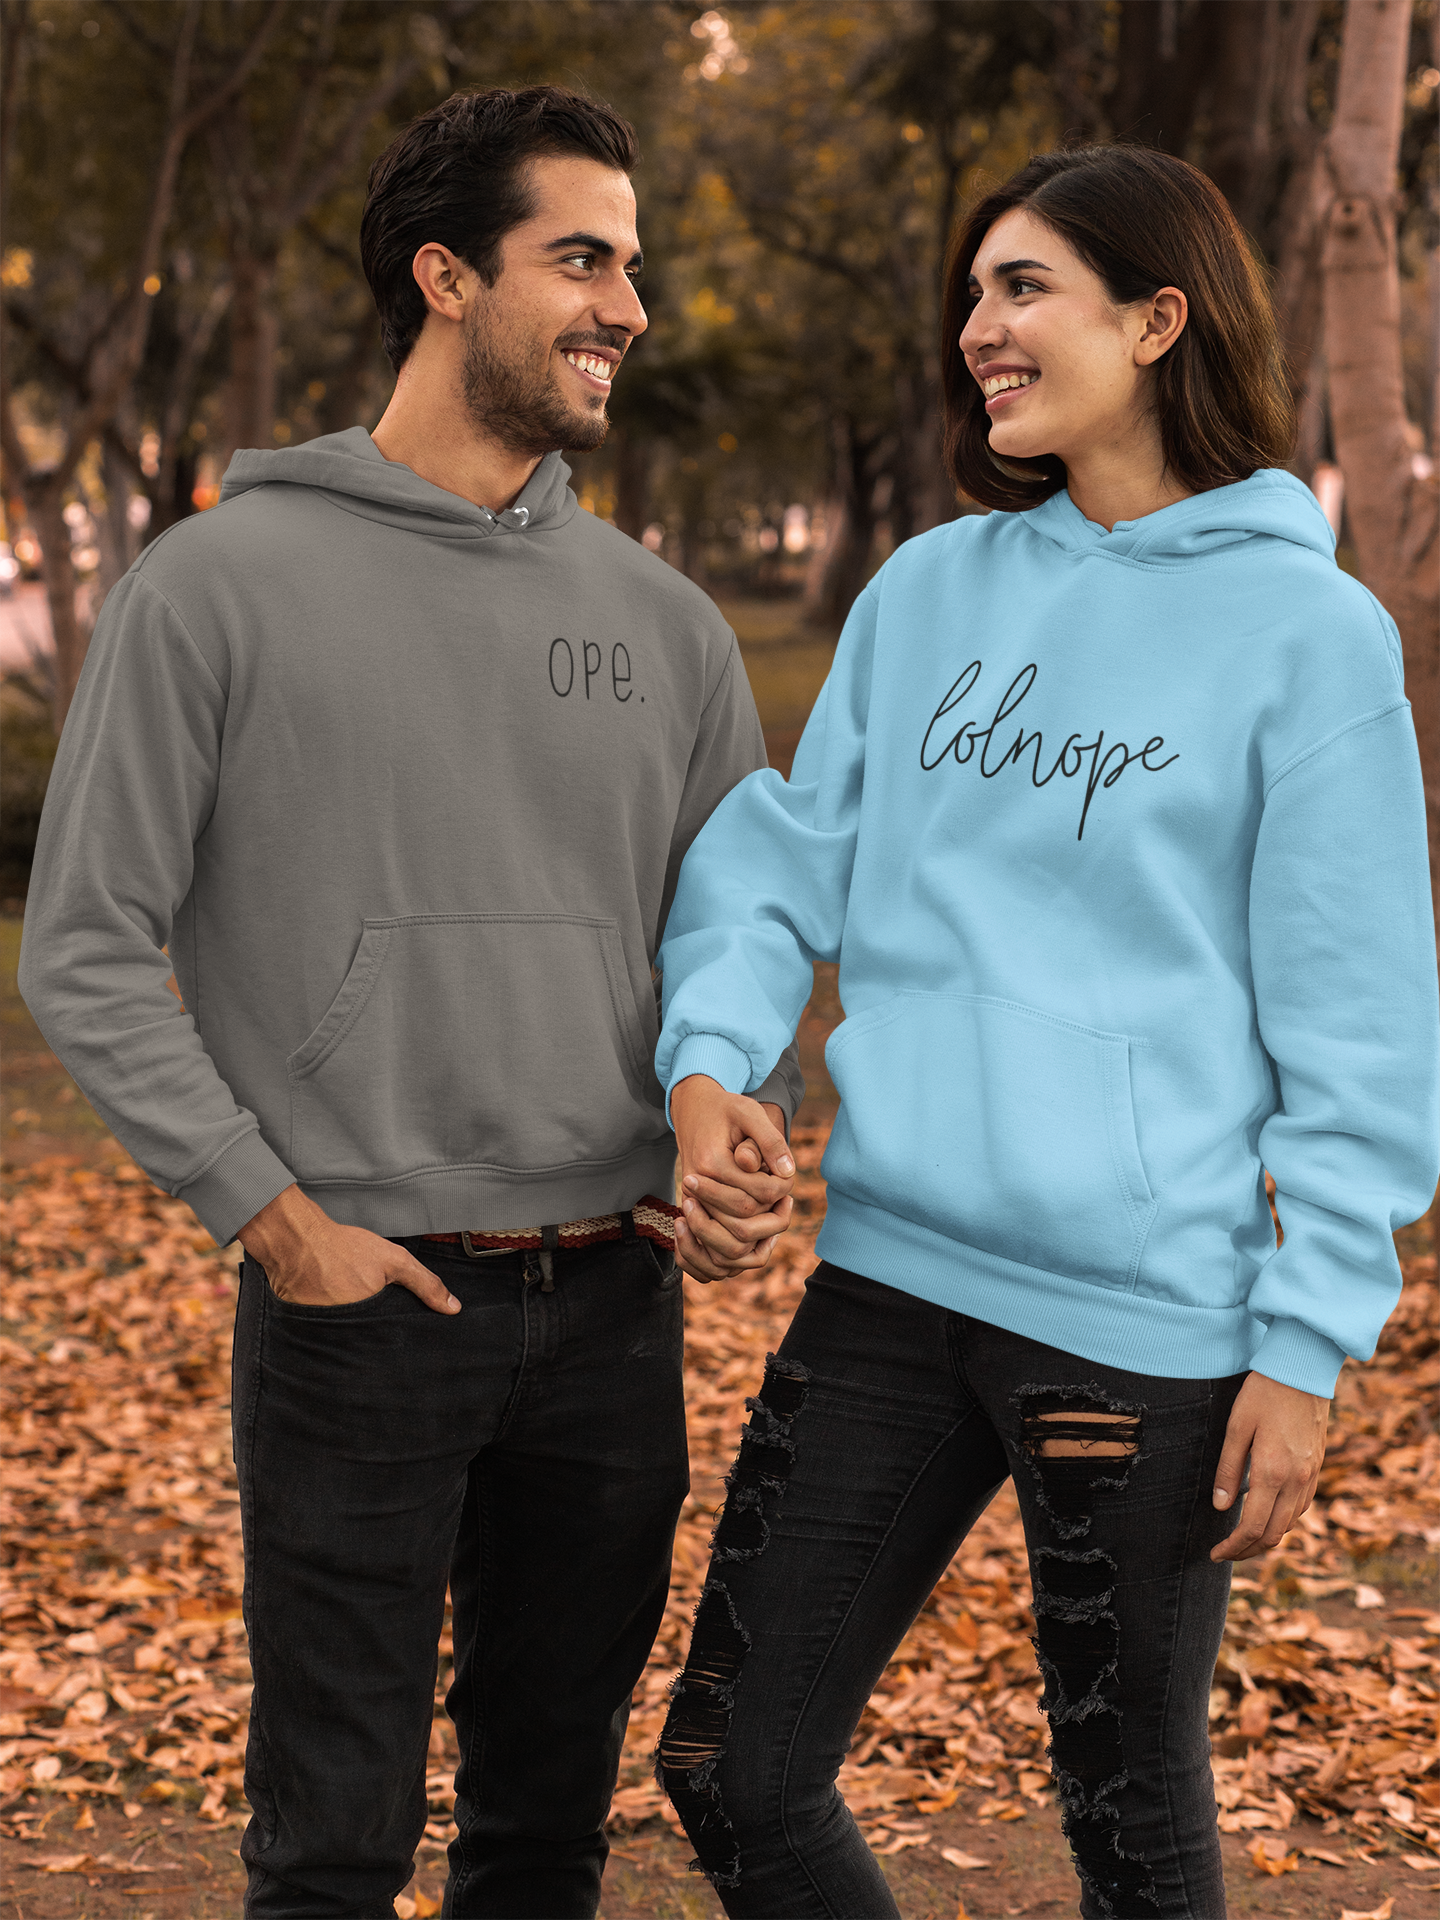 Ever have those days where you just say lolnope? This funny hoodie sweatshirt can say it so you don't have to! This hoodie makes a great gift for those who just can't in your life!